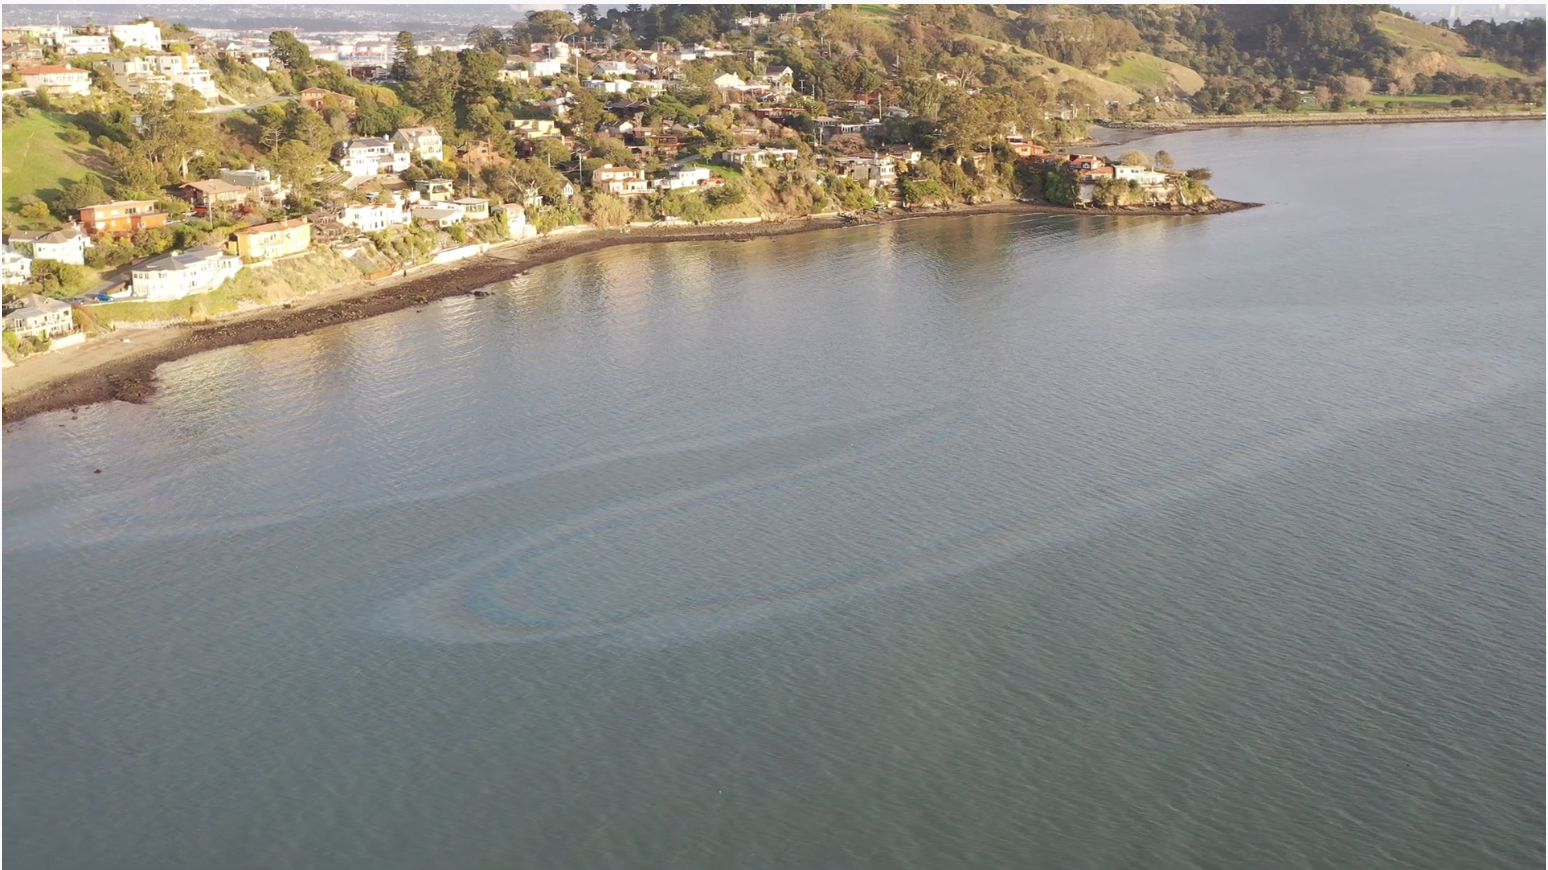 Aerial shot of the oil spill in the San Francisco Bay near Richmond and San Pablo